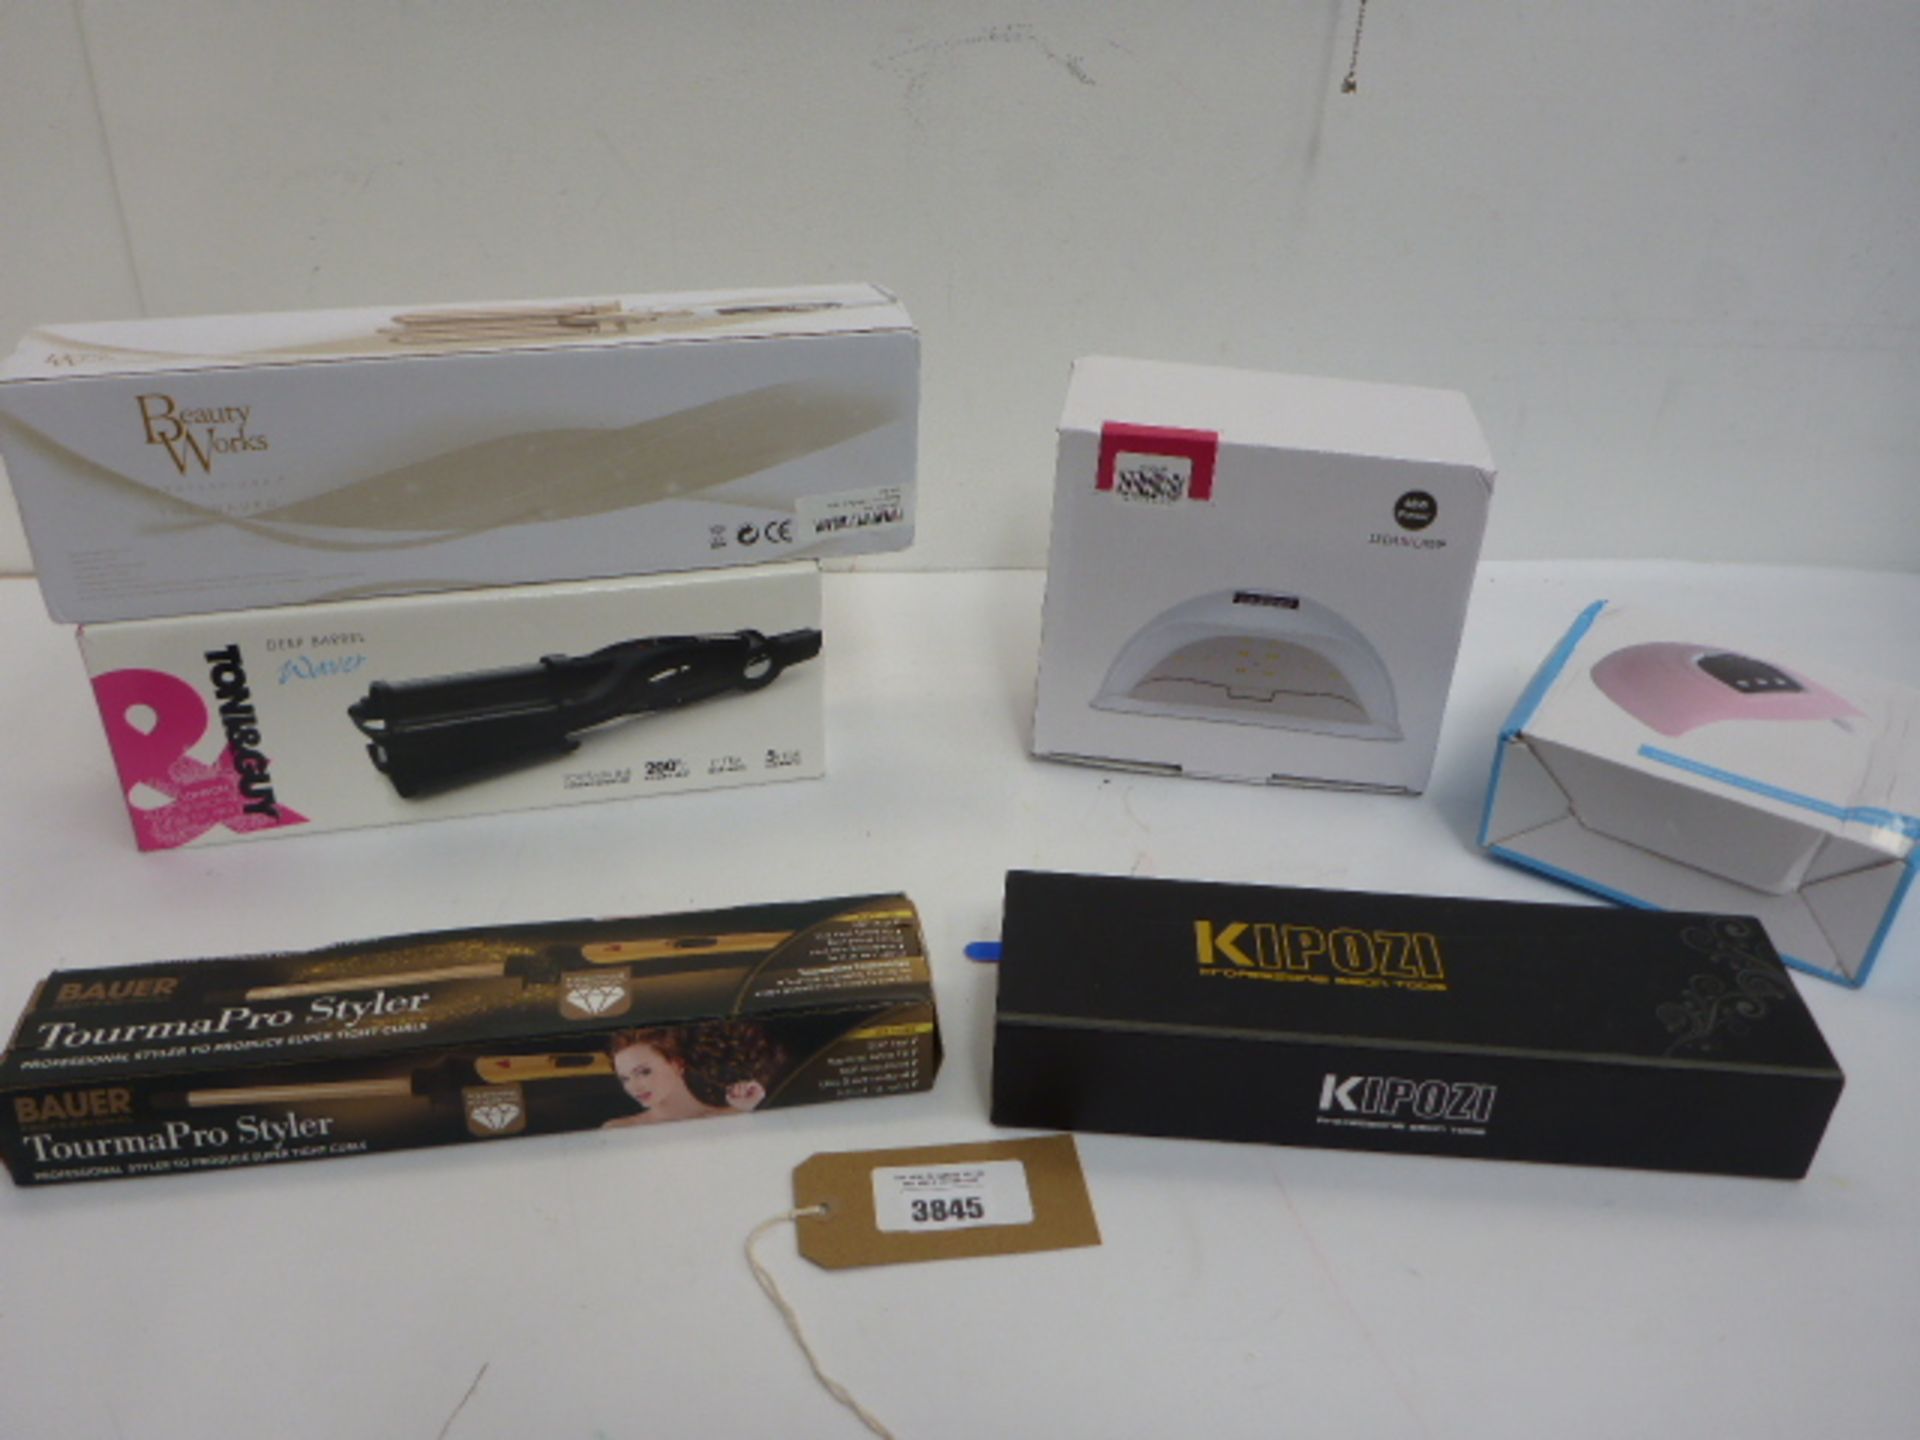 Tony & Guy deep barrel waver, Beauty Works waver and 2 other stylers together with 2 LED/UV lamps